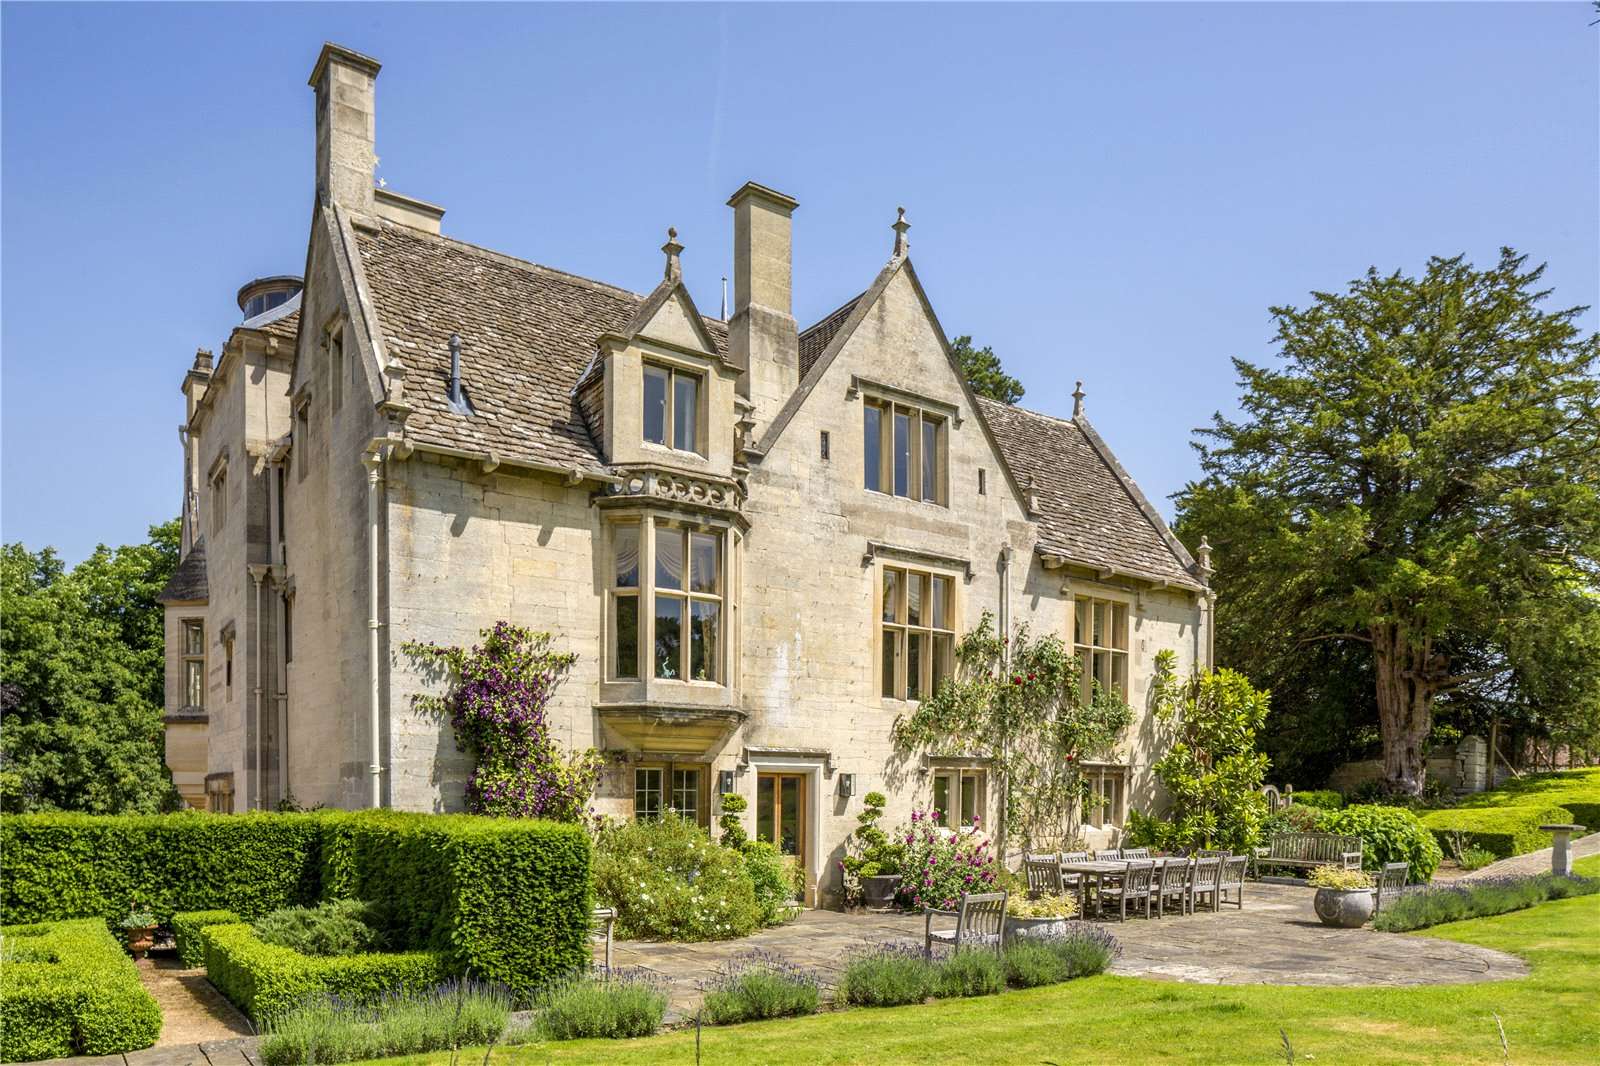 a-spectacular-old-priory-that’s-been-reimagined-time-and-again-for-1,000-years,-with-one-of-the-most-beautiful-poolhouses-you’ll-ever-see